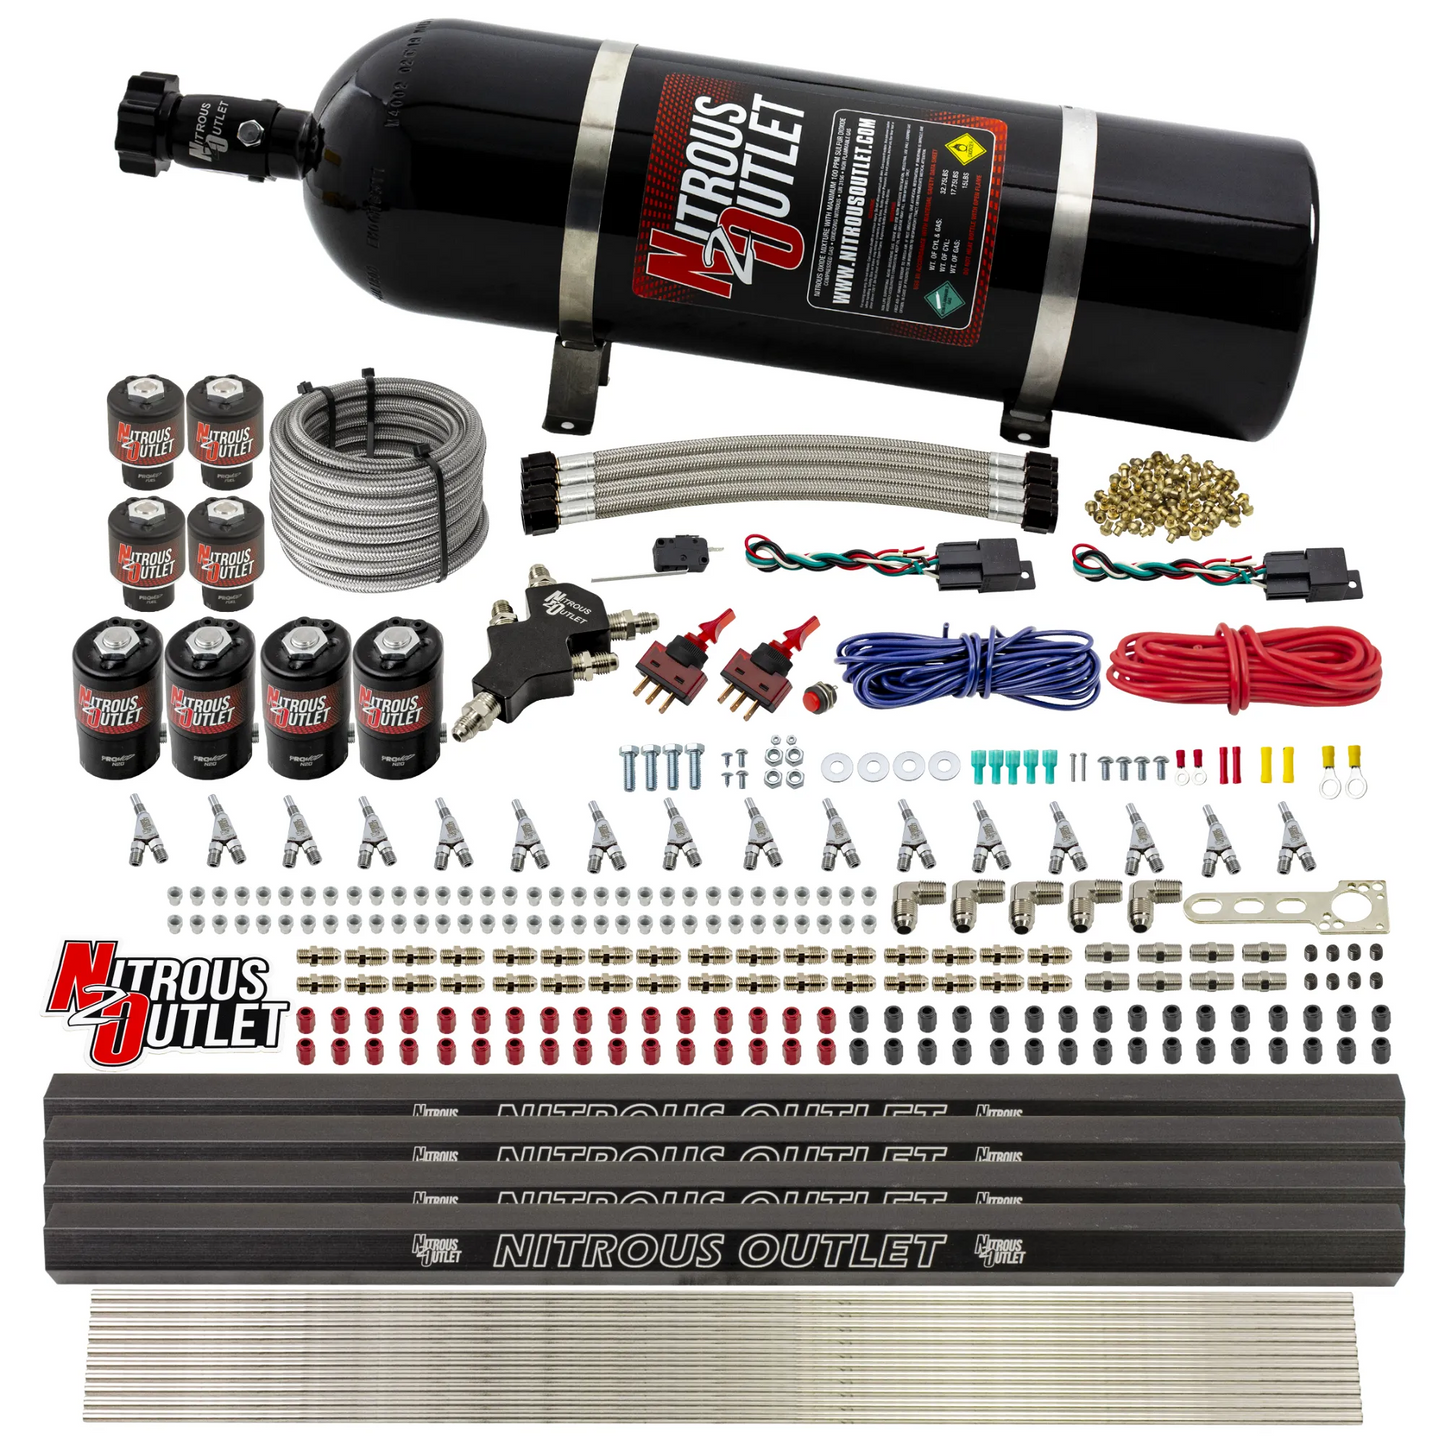 8 Cylinder Dual Stage Direct Port Nitrous System with Injection Rails - E85 - .112 Nitrous/.177 Fuel - 45-55 PSI - Straight Blow Through Nozzles